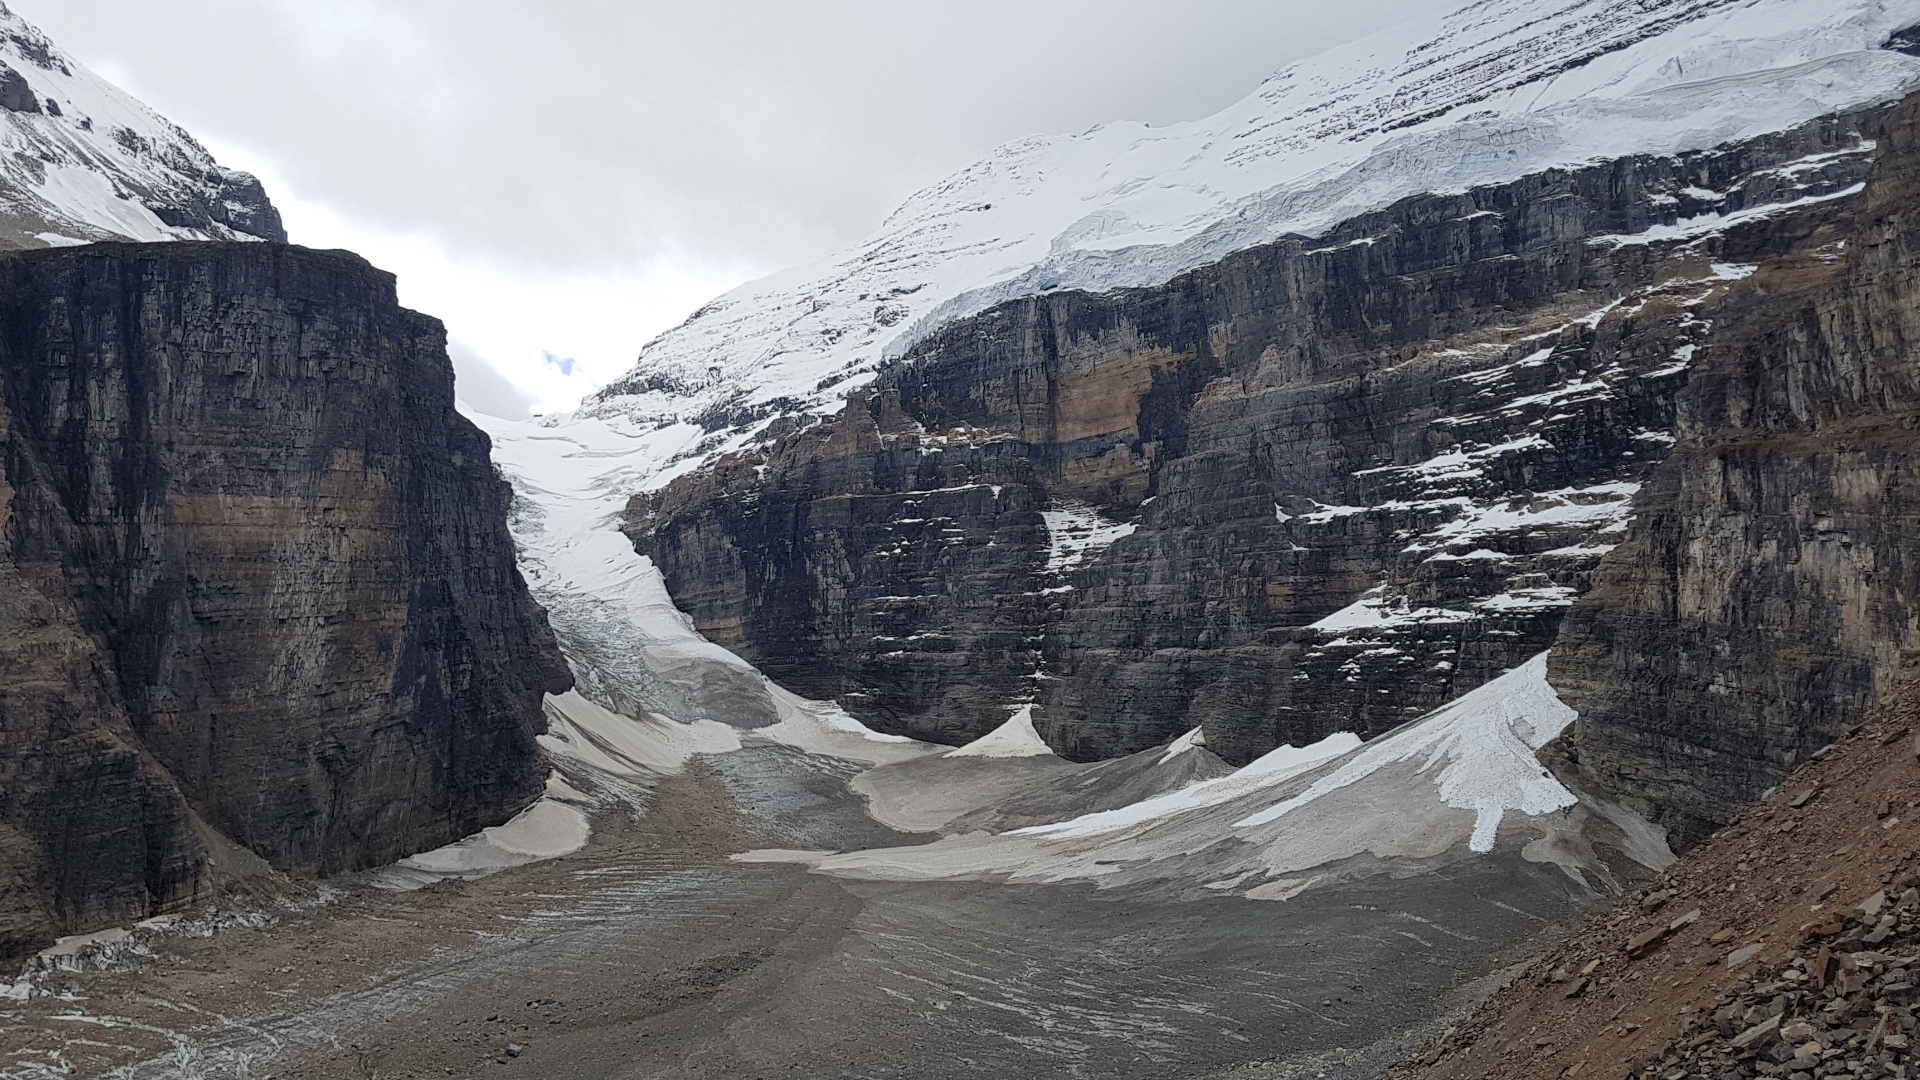 Views to the glacier from the end of Lake Louise hike.